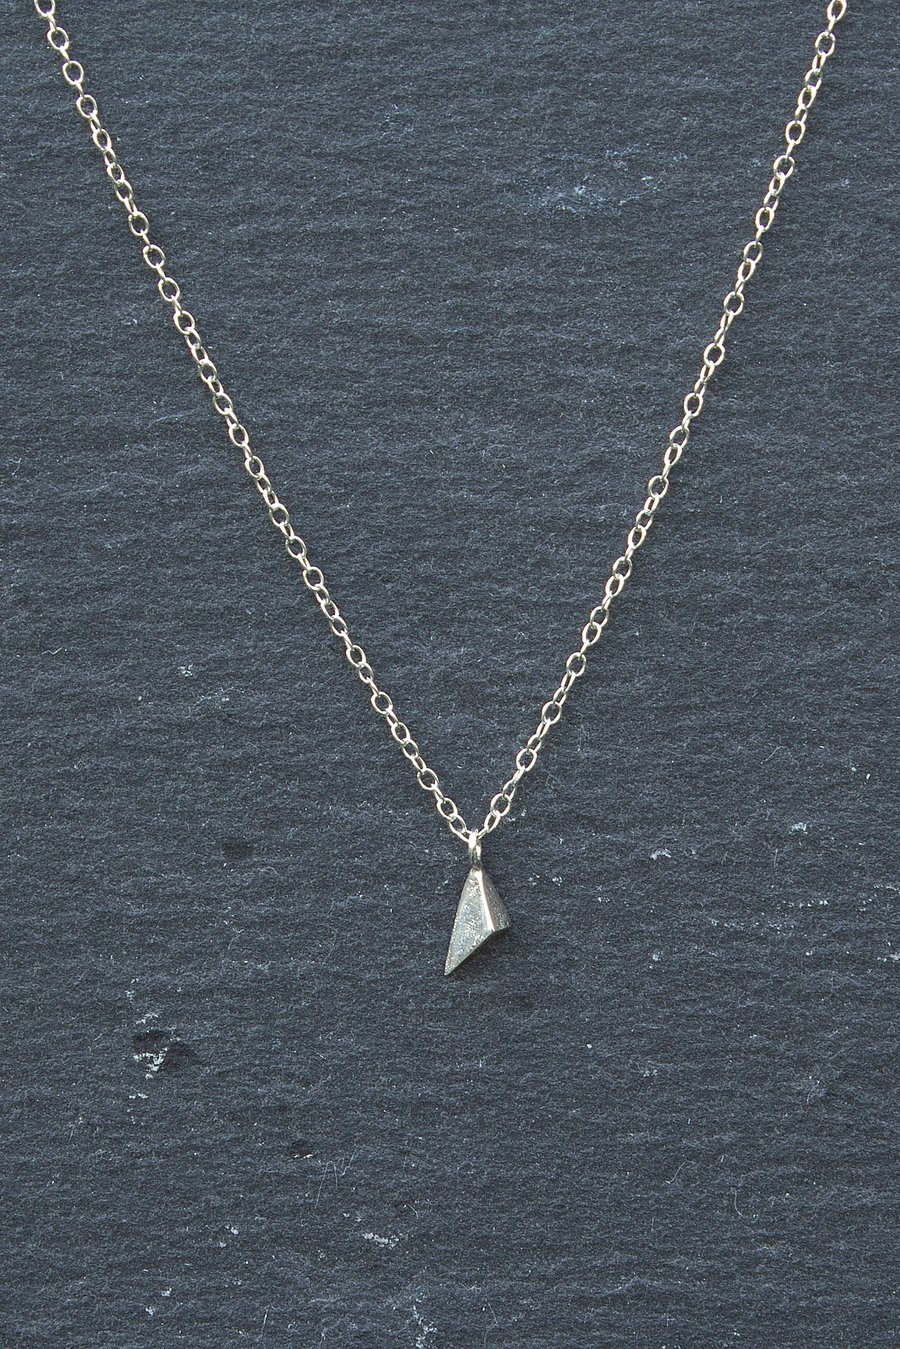 Small triangle necklace